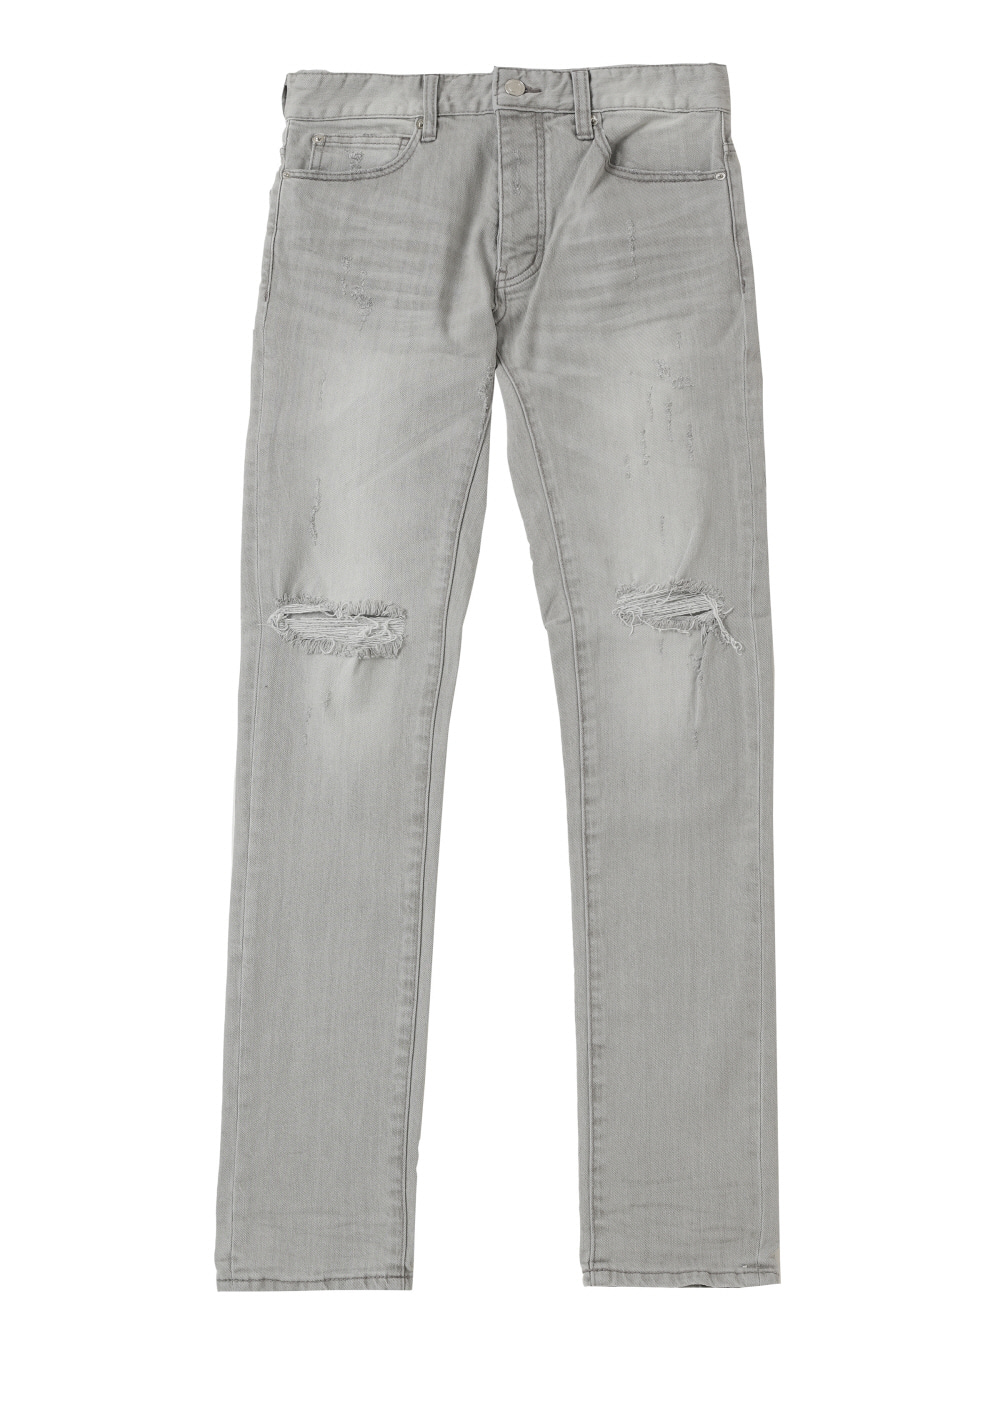 LIGHT GRAY WASHED JEANS